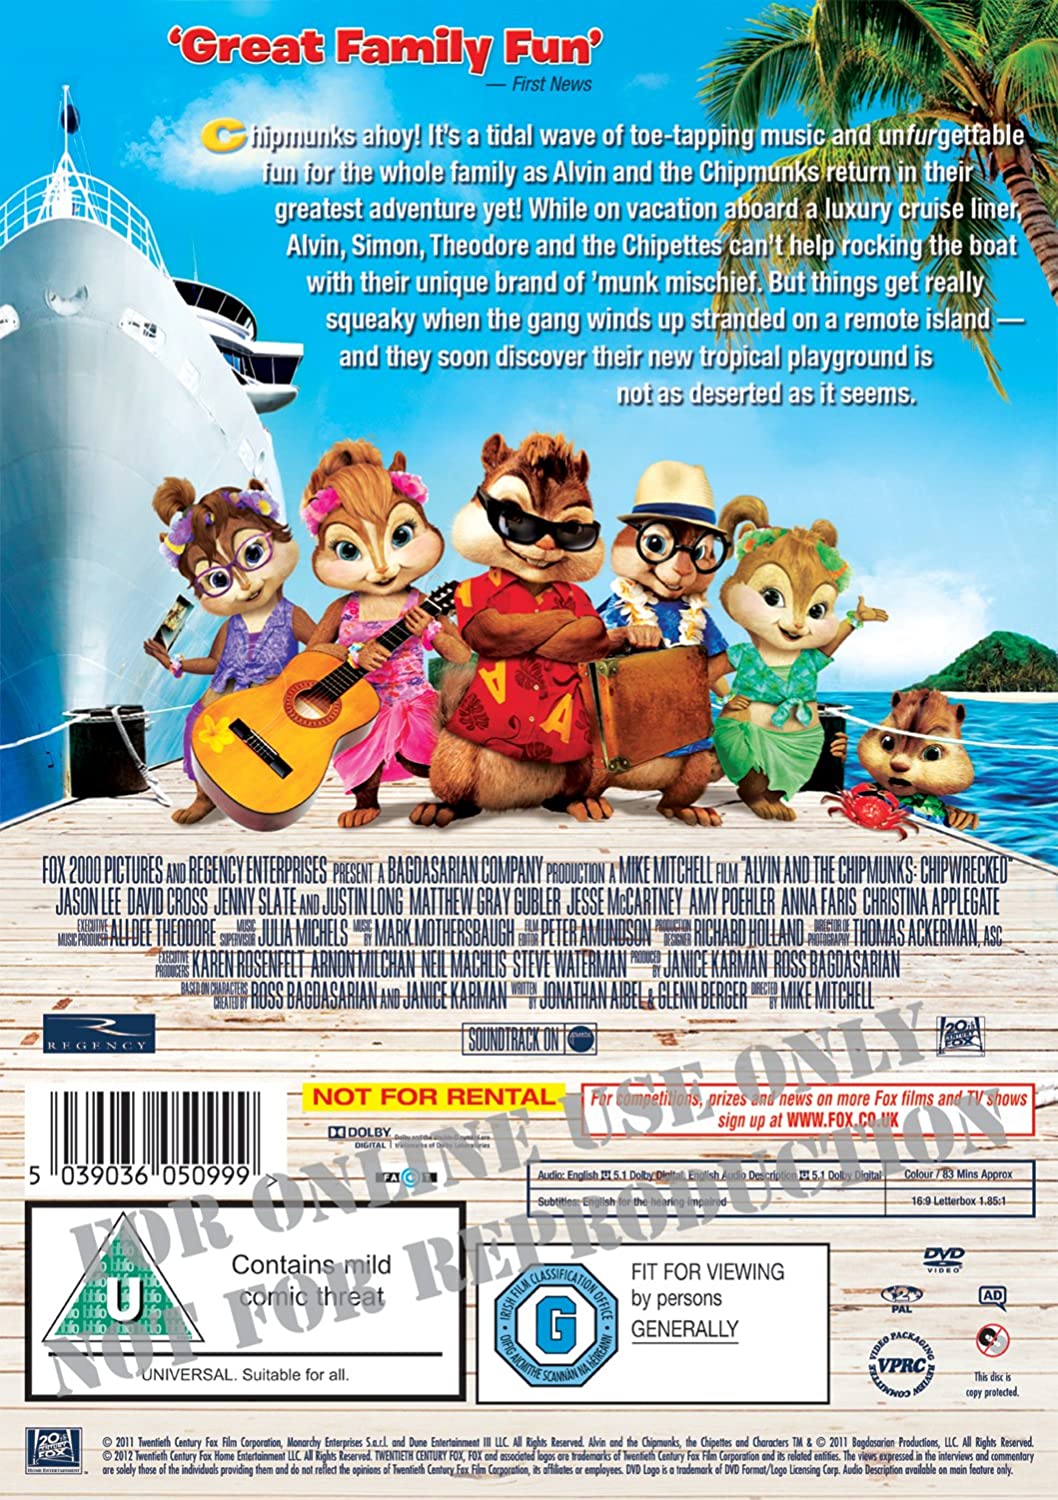 Alvin and the Chipmunks: Chipwrecked [2012]